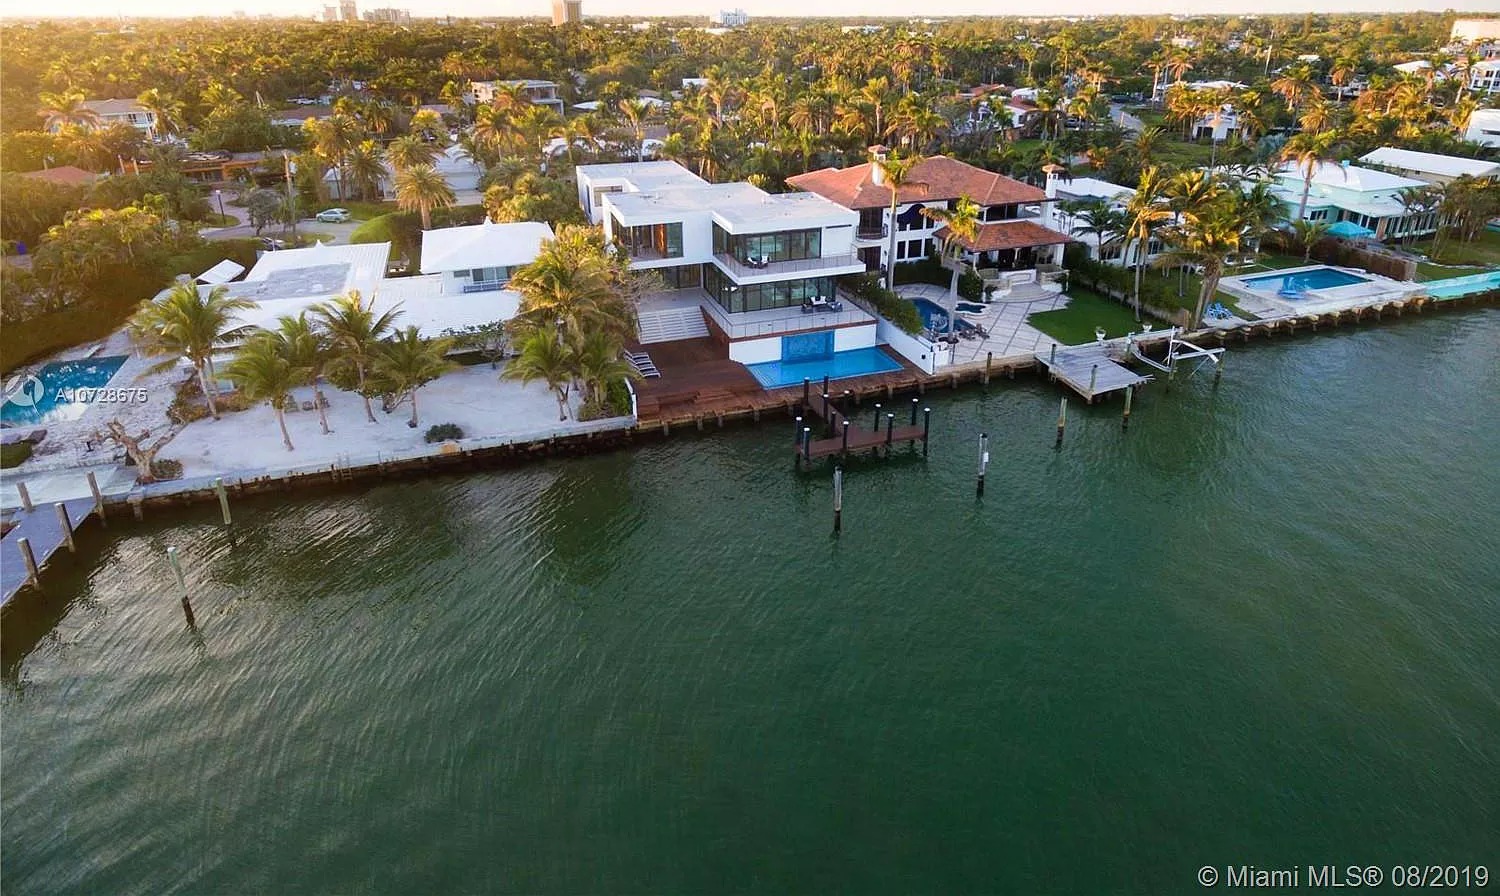 7311 Belle Meade Island Dr, Miami, FL 33138 - $7,850,000 home for sale, house images, photos and pics gallery